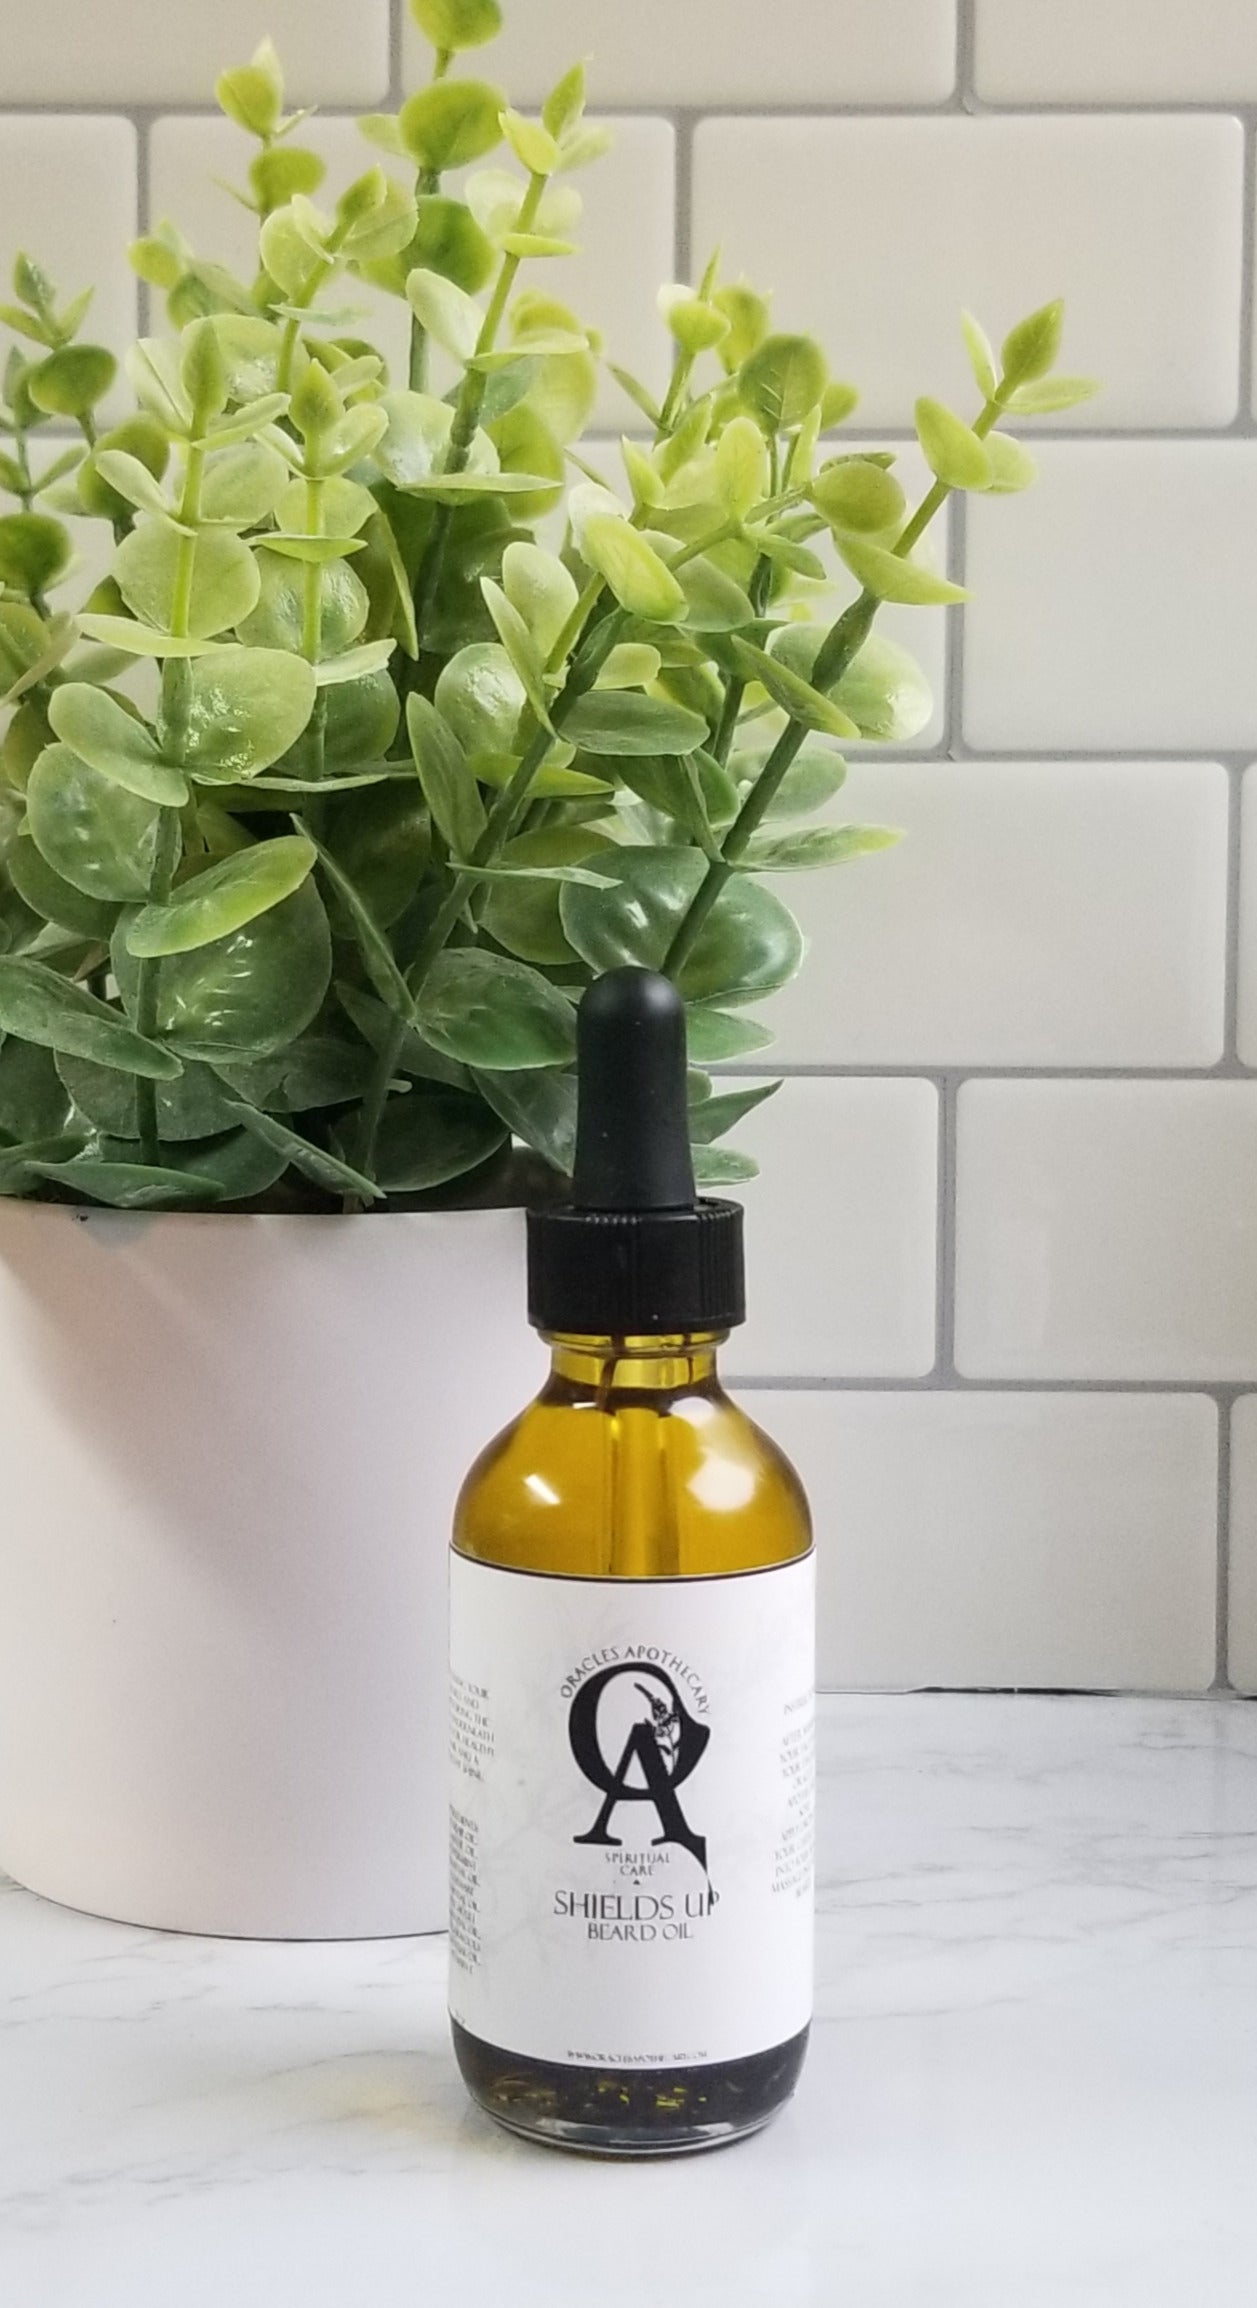 Shields Up Beard Oil – Oracle's Apothecary